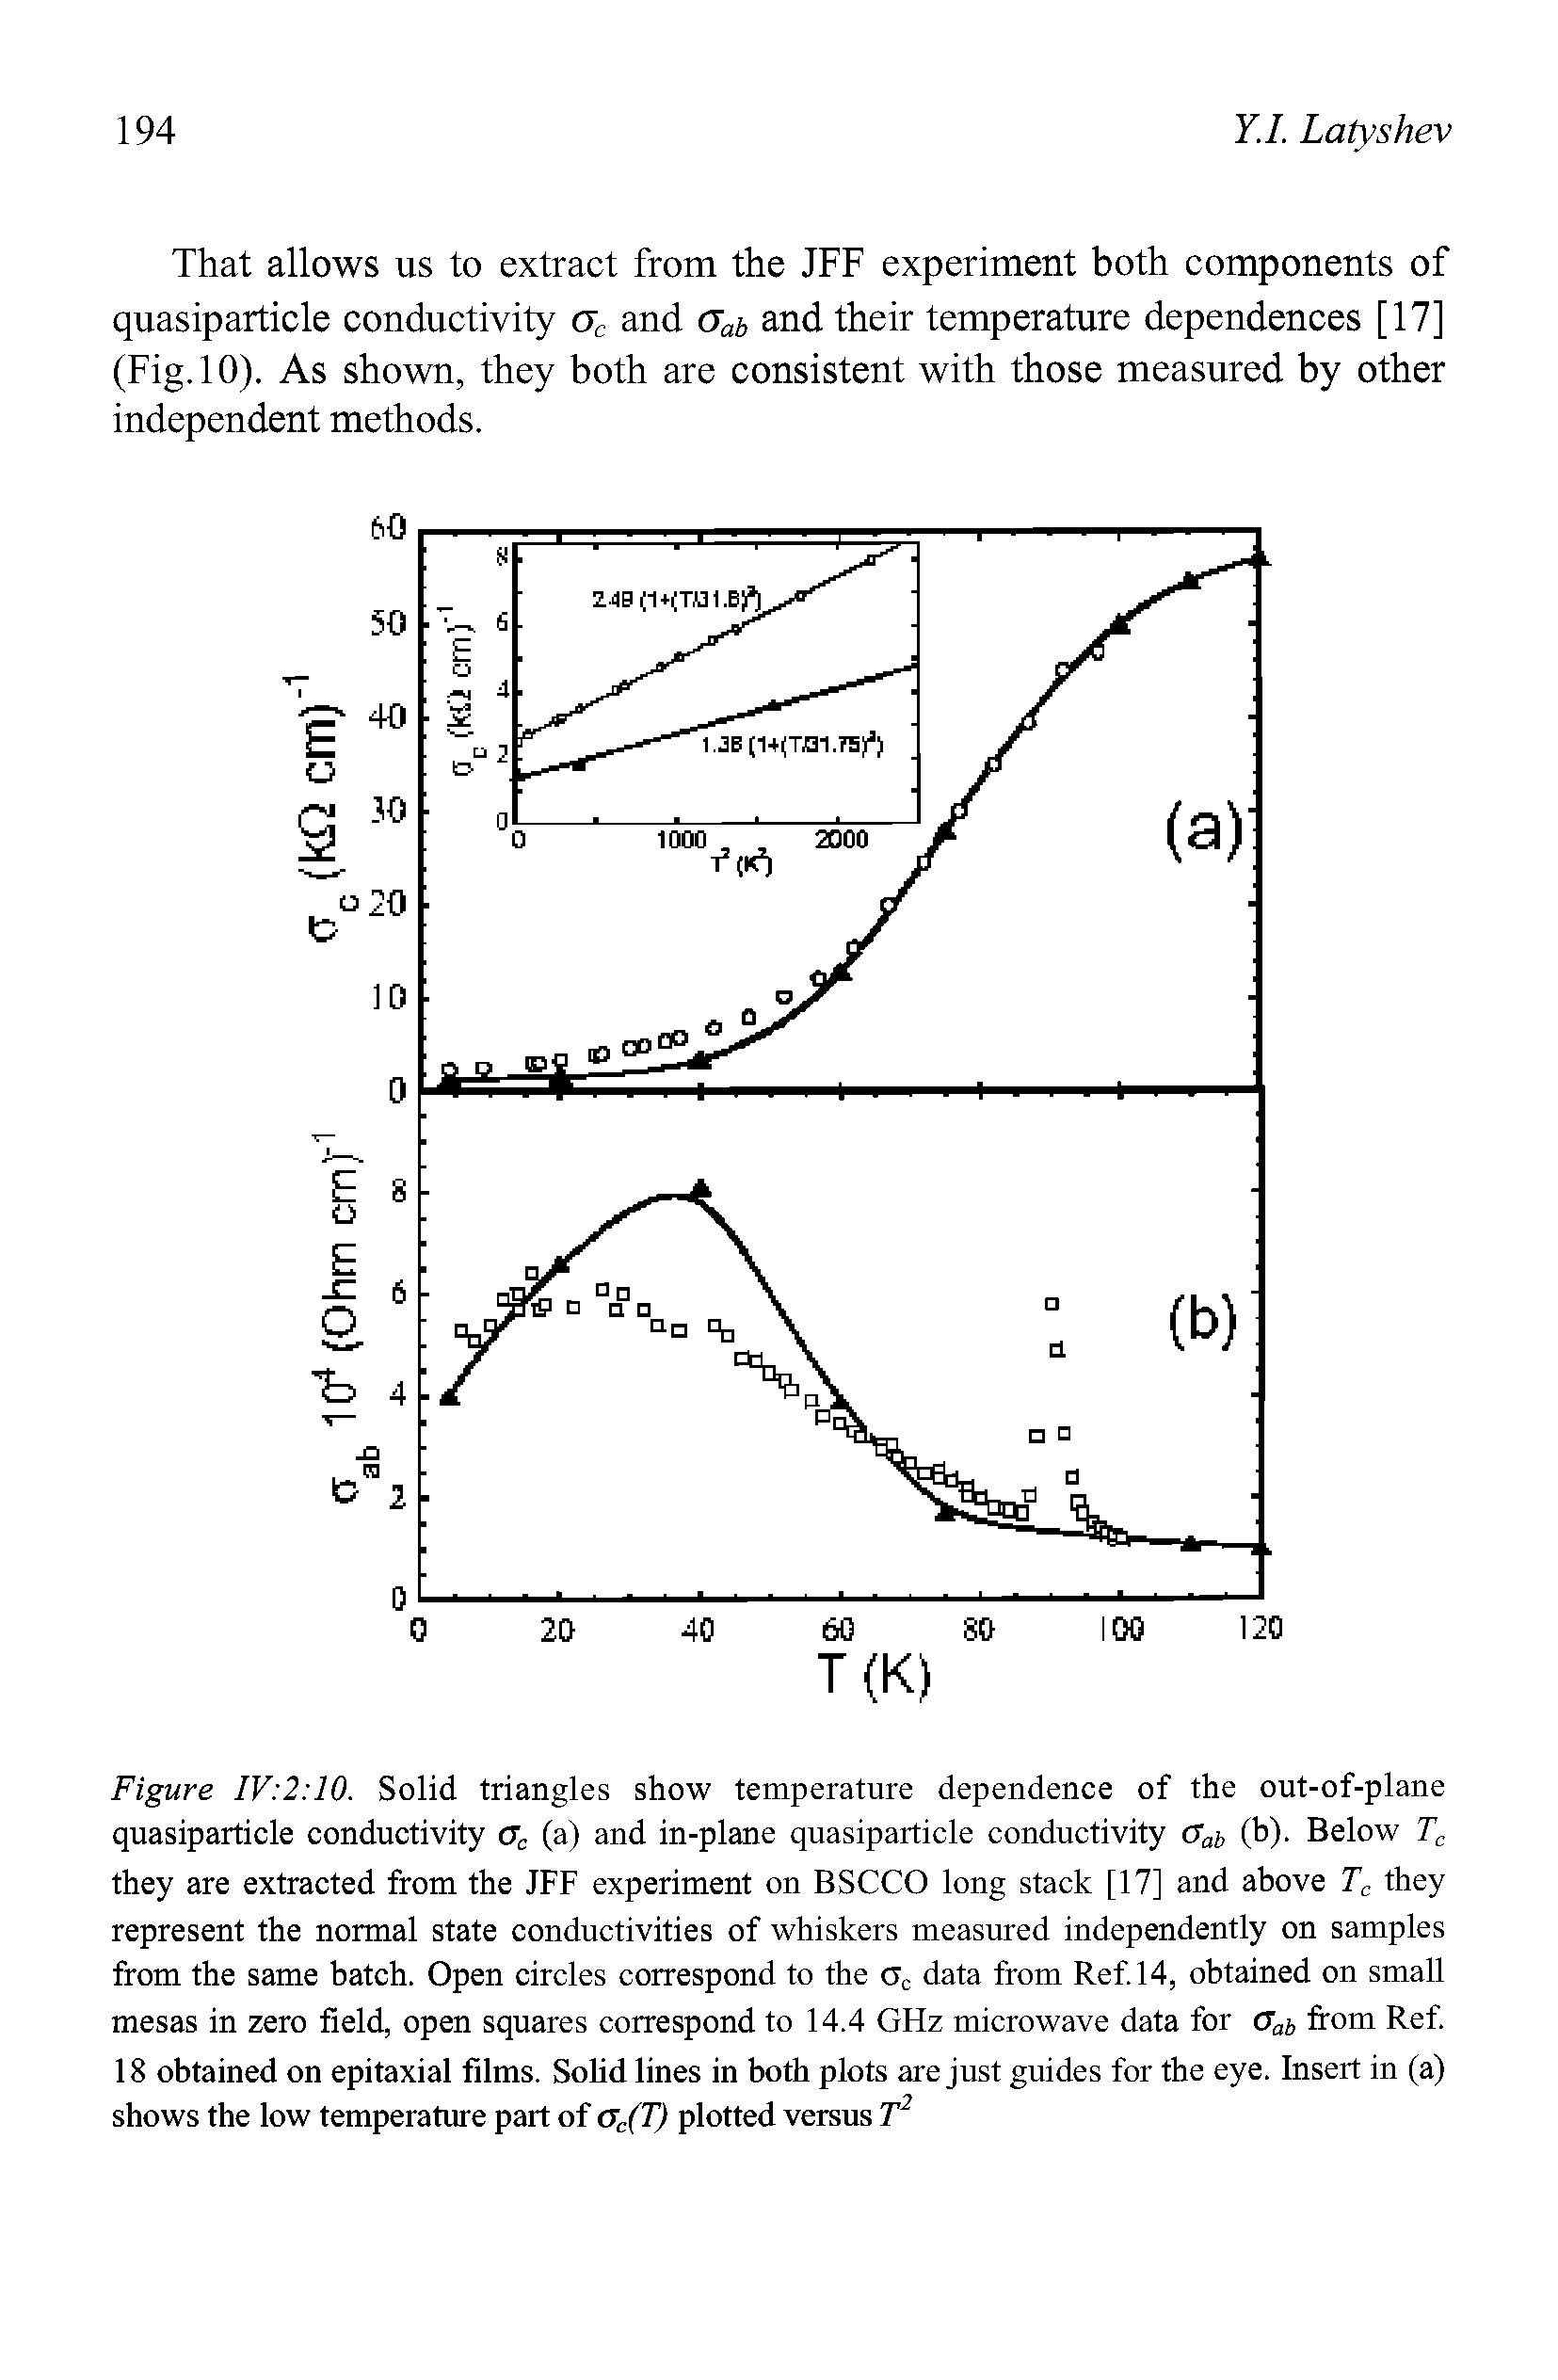 Figure IV 2 10. Solid triangles show temperature dependence of the out-of-plane quasiparticle conductivity ac (a) and in-plane quasiparticle conductivity Gab (b). Below Tc they are extracted from the JFF experiment on BSCCO long stack [17] and above Tc they represent the normal state conductivities of whiskers measured independently on samples from the same batch. Open circles correspond to the oc data from Ref. 14, obtained on small mesas in zero field, open squares correspond to 14.4 GHz microwave data for cab from Ref. 18 obtained on epitaxial films. Solid lines in both plots are just guides for the eye. Insert in (a) shows the low temperature part of ac(T) plotted versus T2...